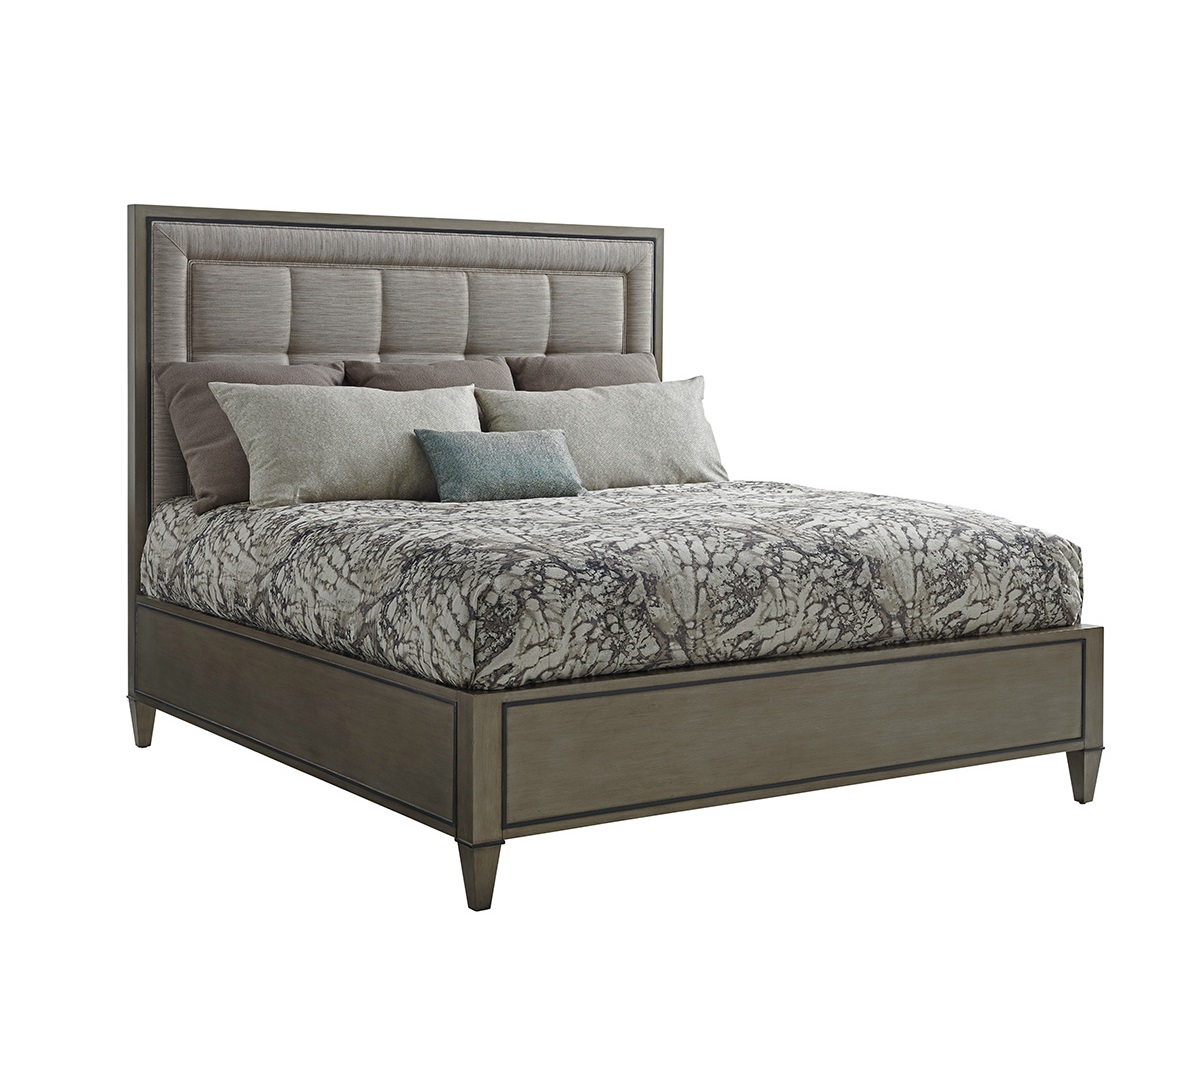 Ariana ST. Tropez Bed, Lexington Upholstered Panel Bed